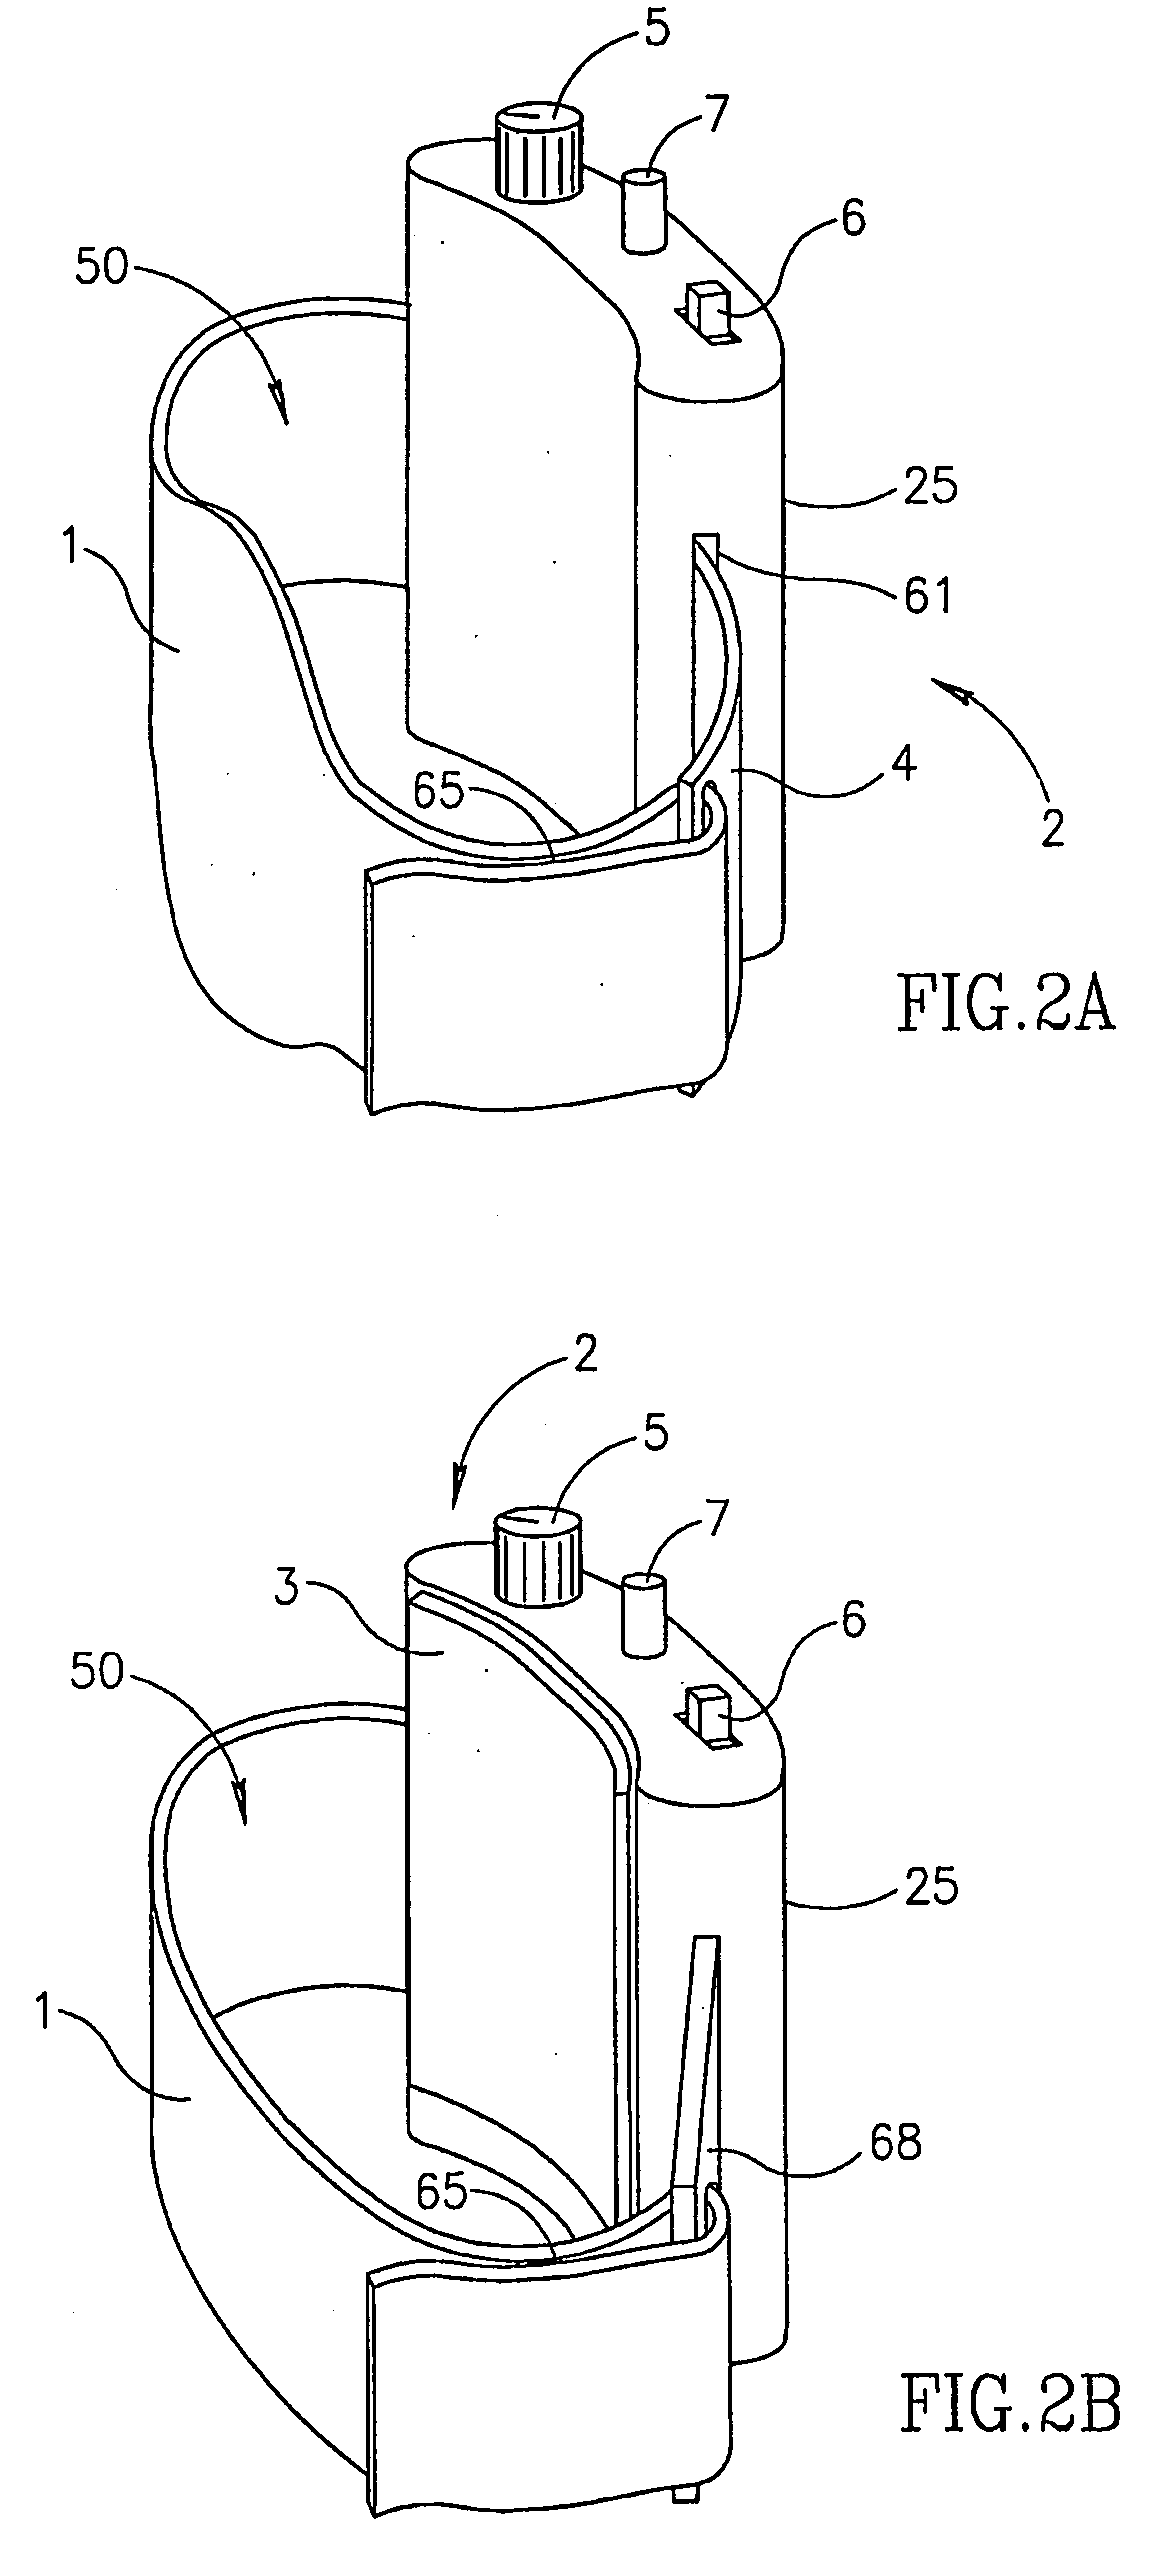 Sleeves for Accommodating a Circulation Enhancement Device